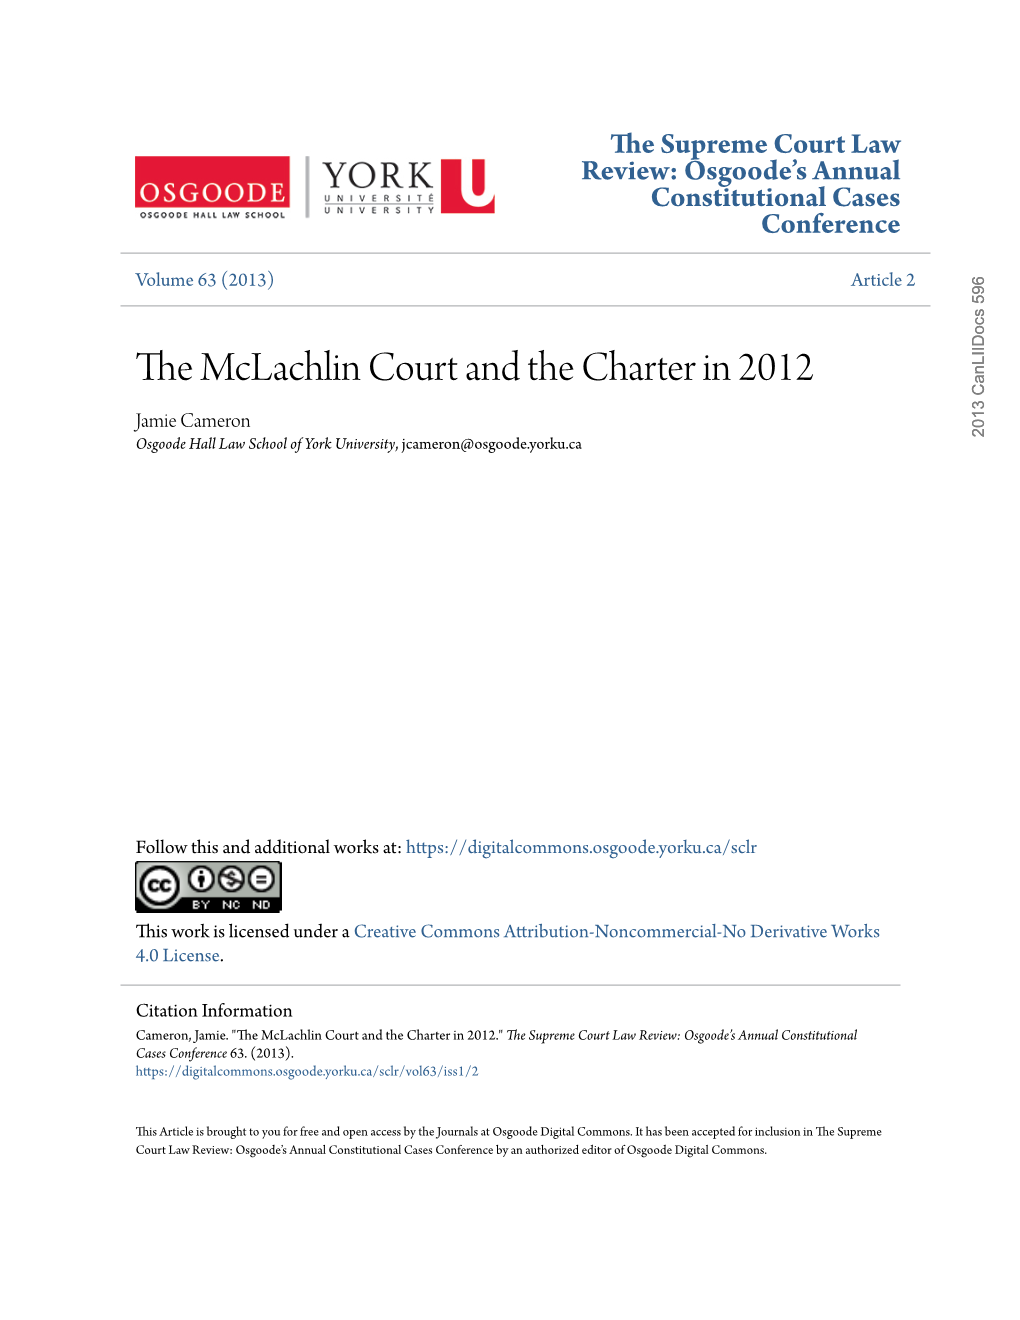 The Mclachlin Court and the Charter in 2012